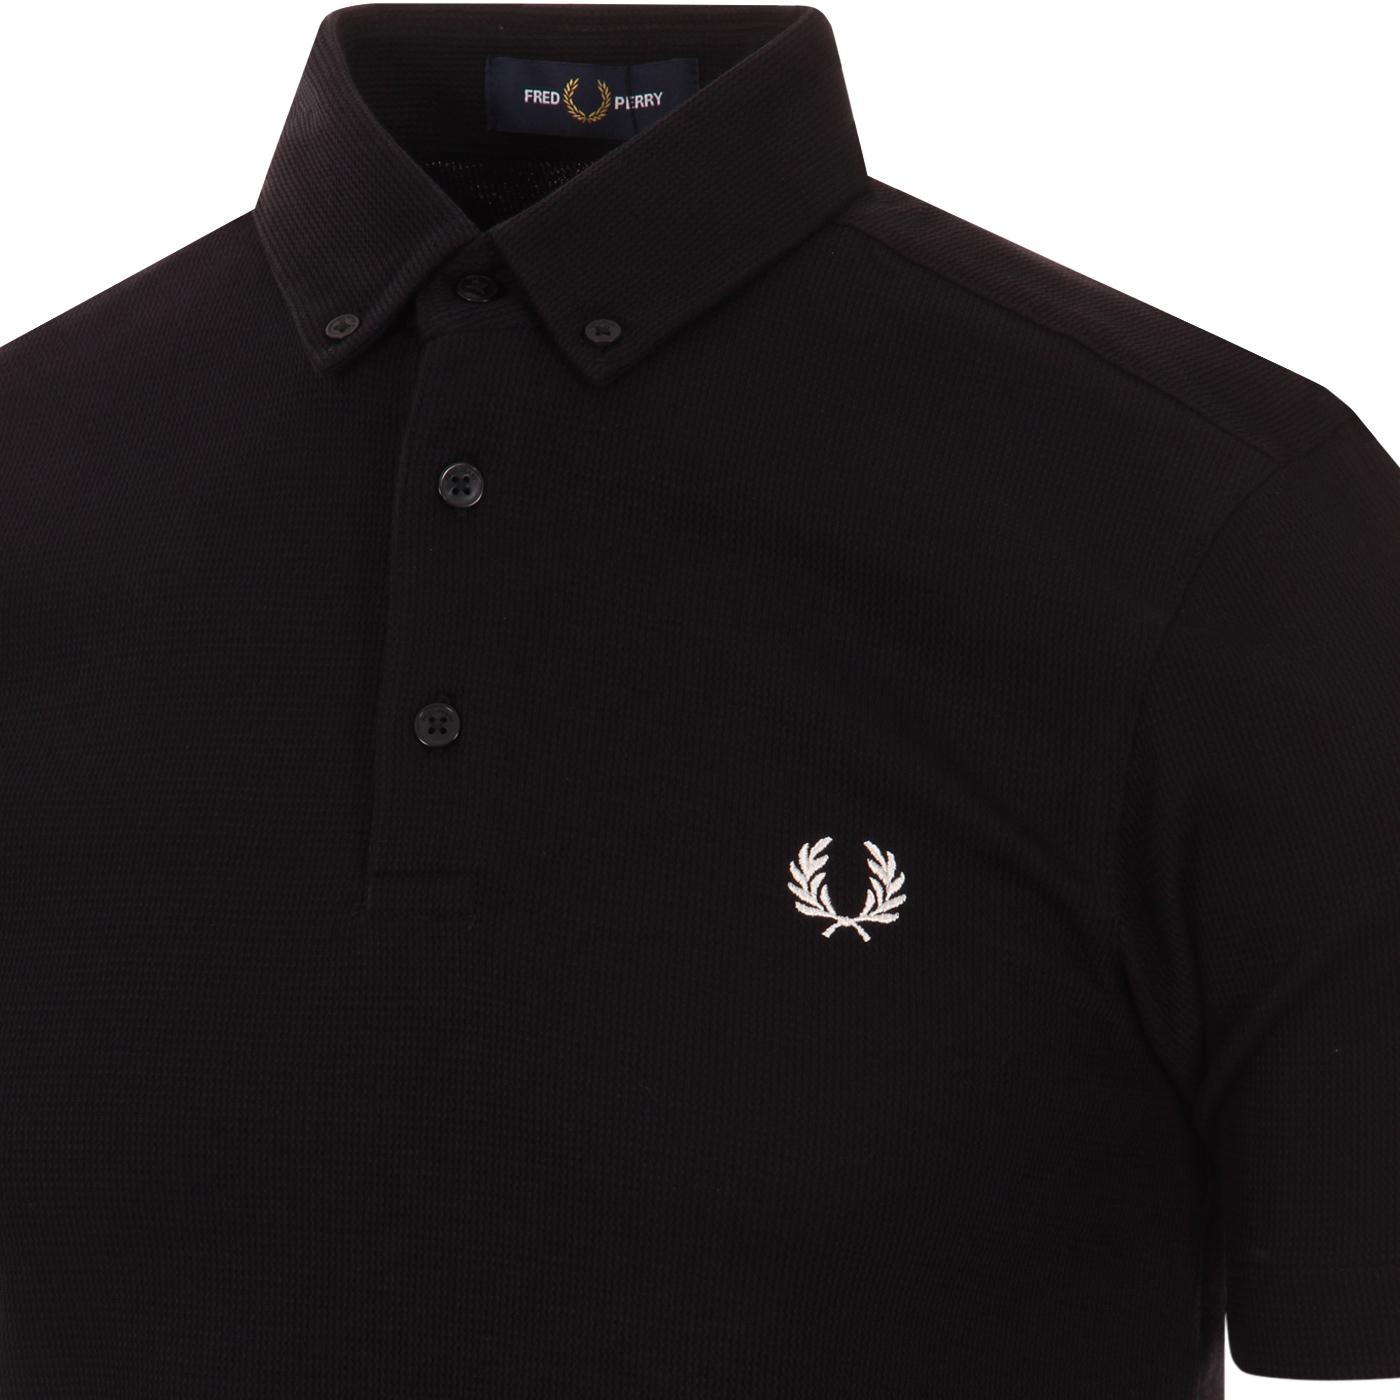 FRED PERRY Retro Textured Button Down Polo Shirt in Black